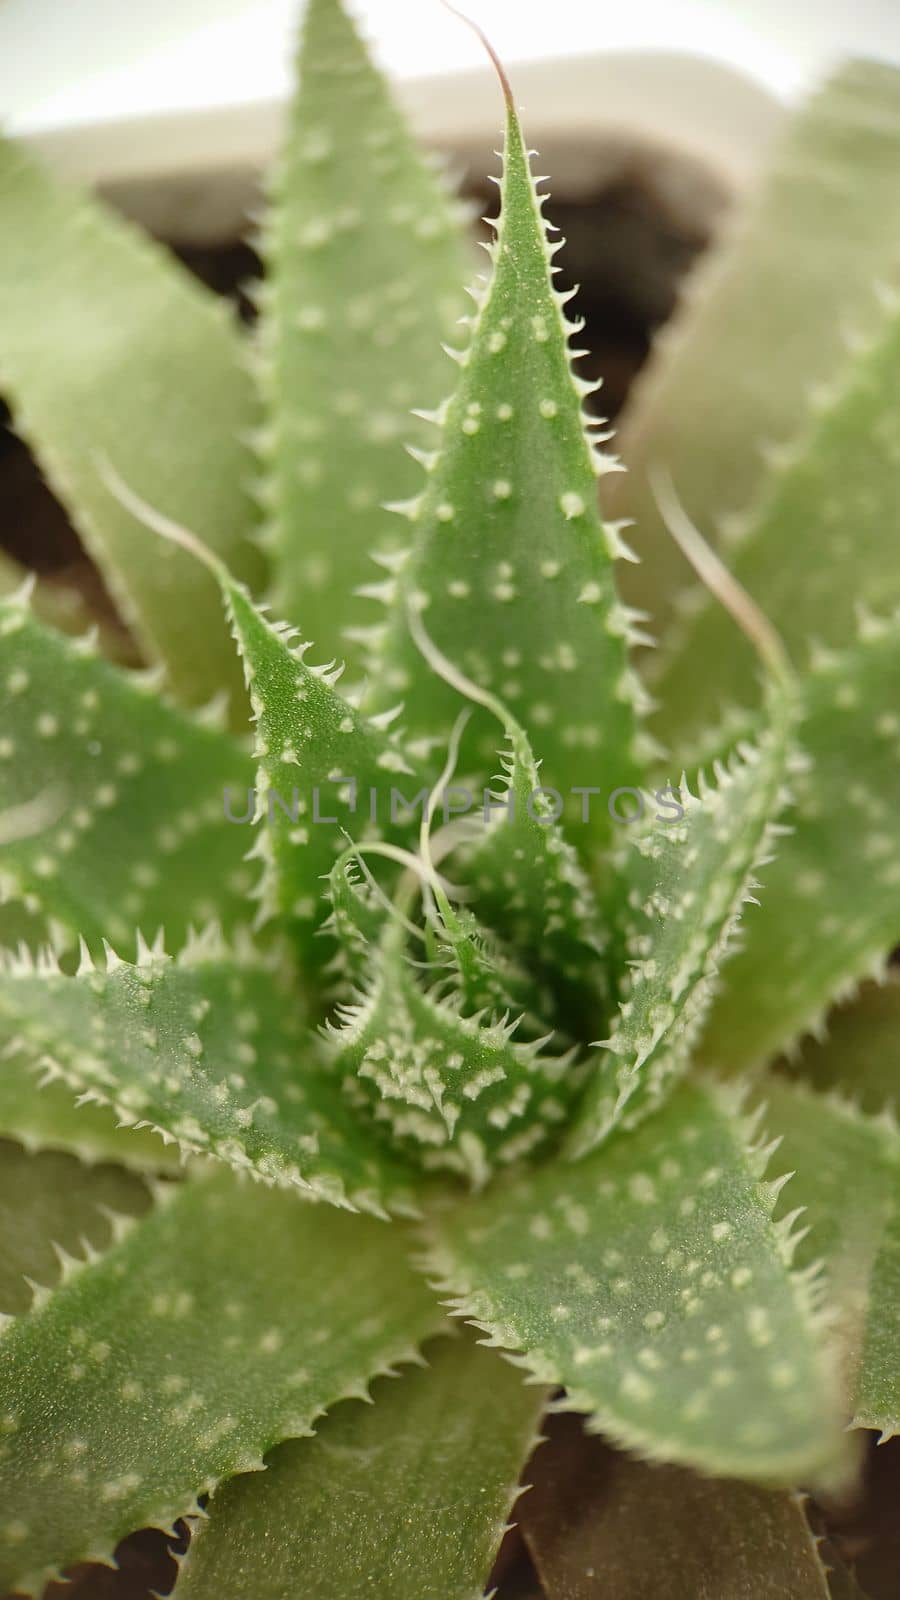 Macrophotography.Lily family green aloe cactus close-up in a pot. Texture or background